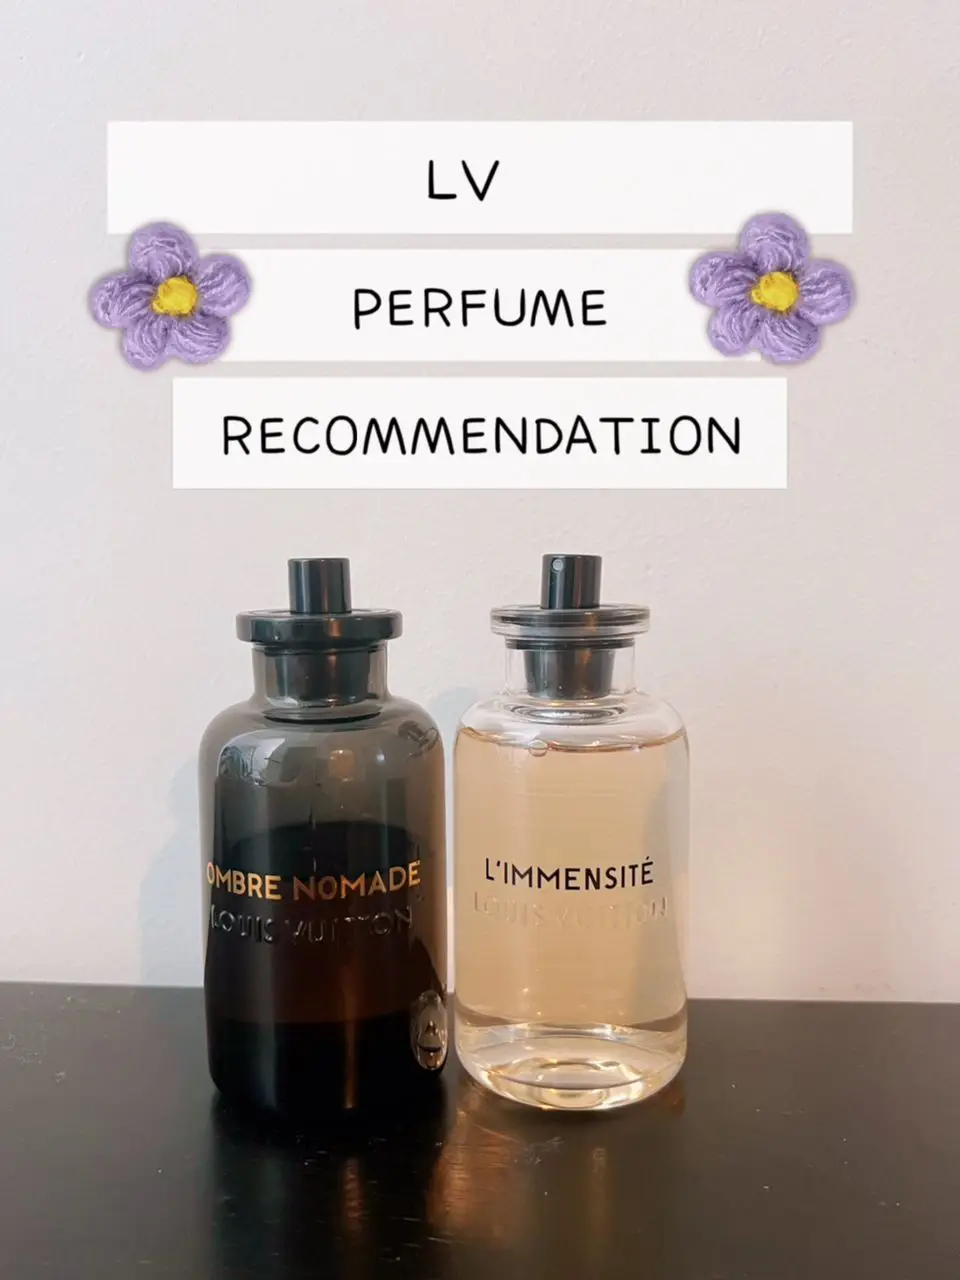 LV Battle Parfume! ❤️‍🔥, Gallery posted by Michelle Aruan